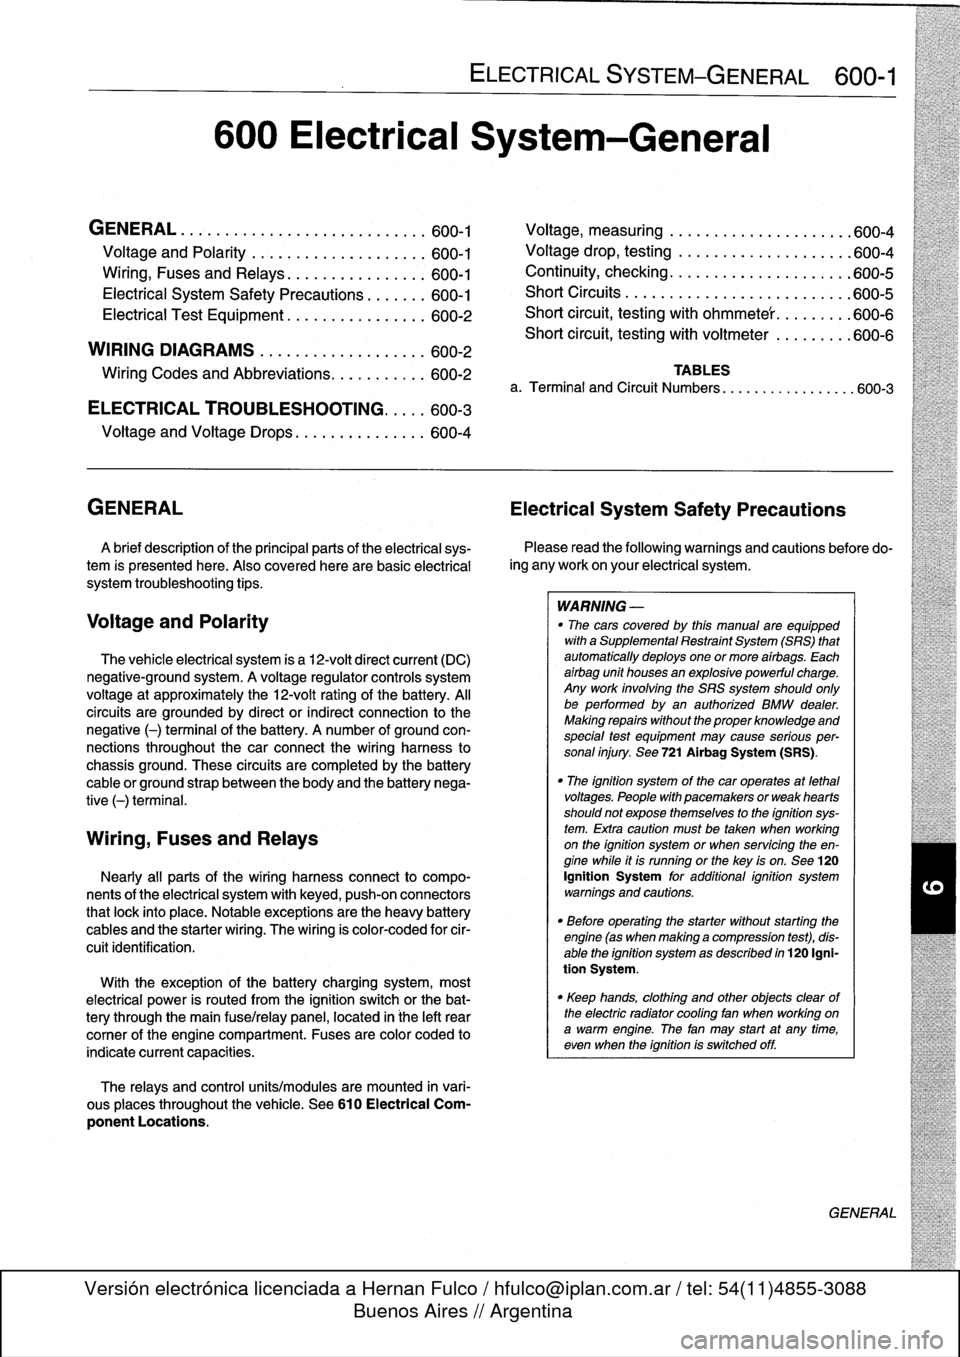 BMW 328i 1995 E36 Workshop Manual 
600
Electrical
System-General

GENERAL
.
...........
.
.
.
.
.
.
.
.
.
...
.
...
600-1

Voltage
and
Polarity
........
.
.
.
.
.
.
.
.....
600-1

Ming,
Fuses
and
Relays
............
.
.
.
.
600-1

Ele